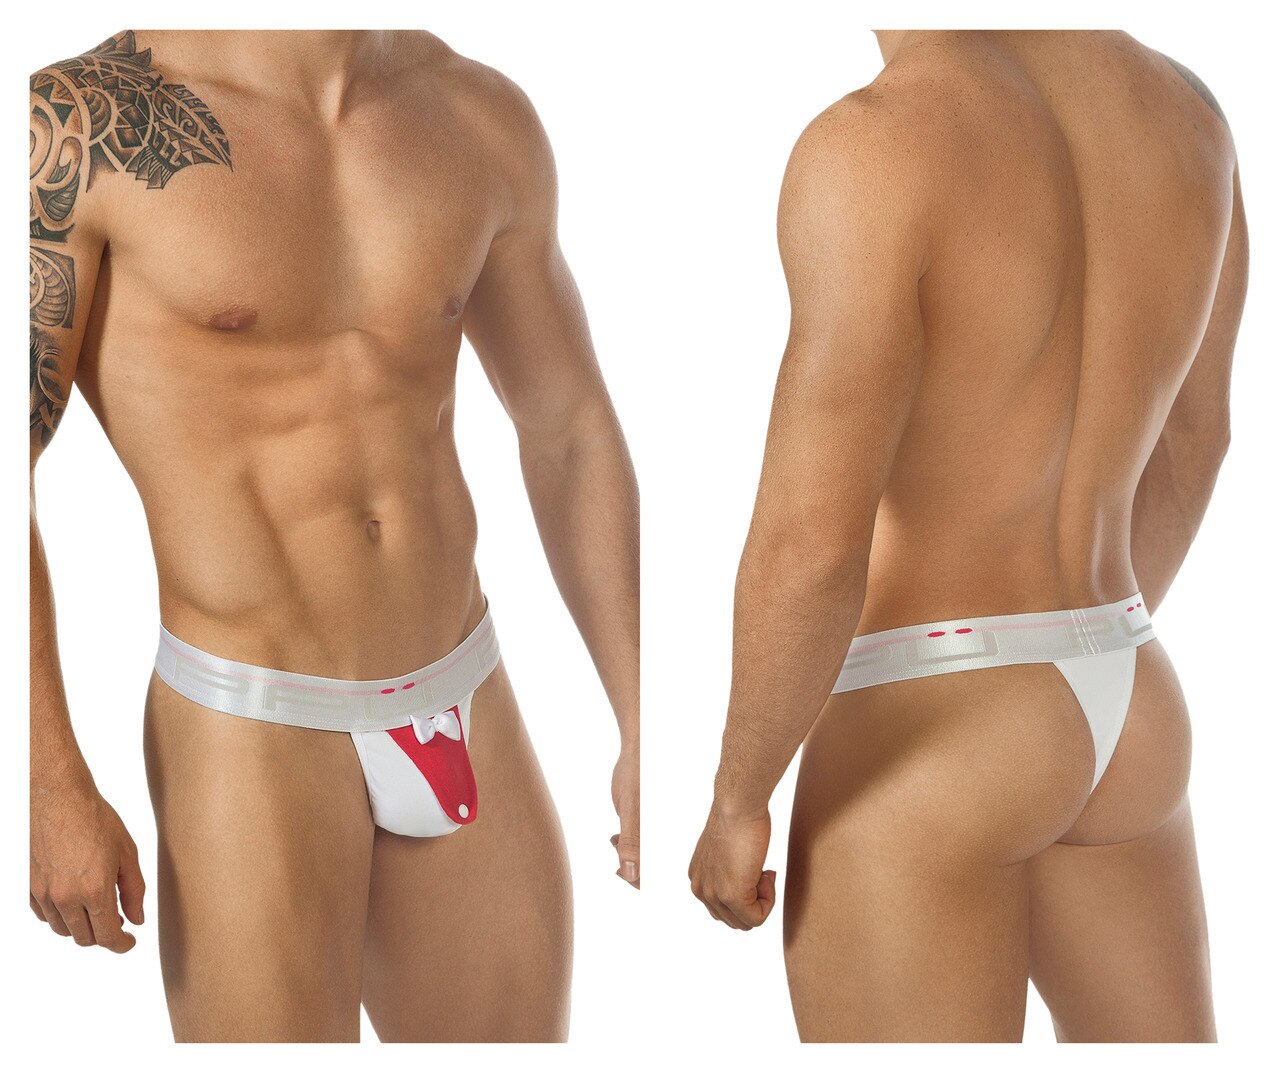 SALE - Mens Tuxedo Thong Red and White